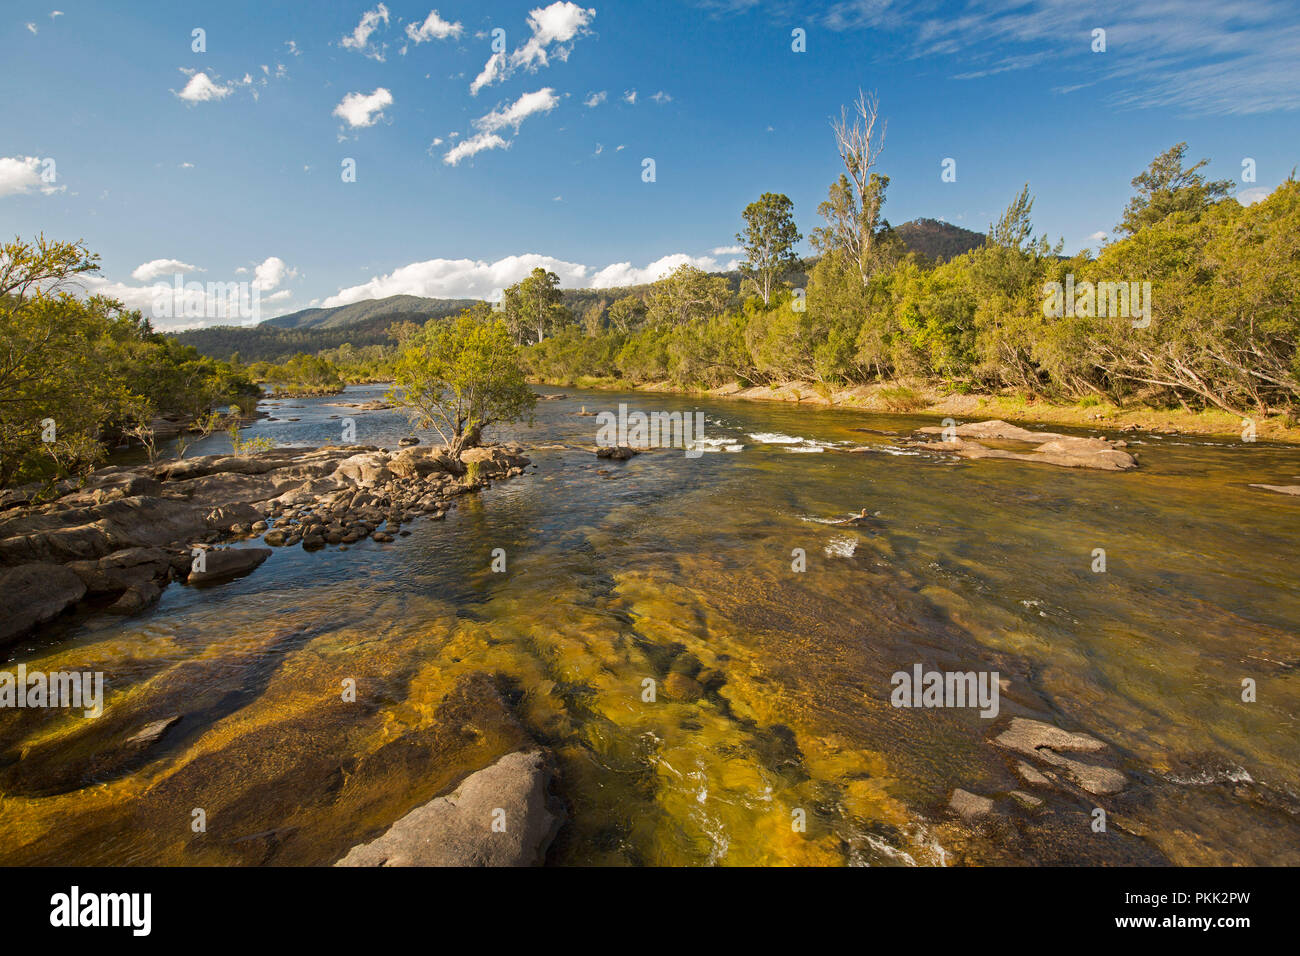 Stunning Australian landscape with rock strewn blue waters of Mann River hemmed by forests at foot of ranges under blue sky with flecks of cloud - NSW Stock Photo